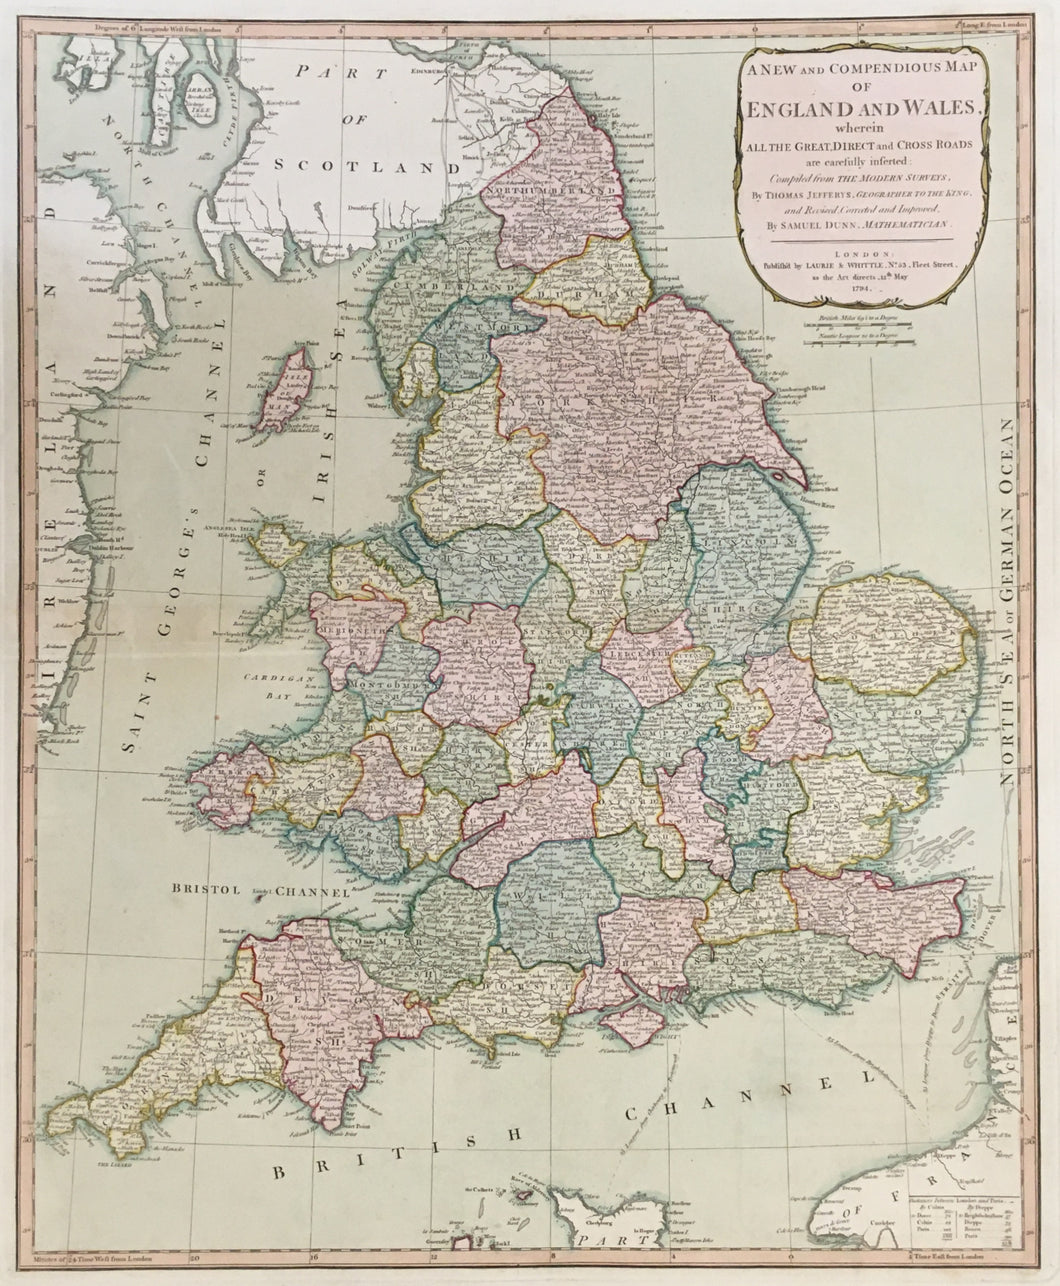 Dunn, Samuel “A New and Compendious Map of England and Wales…